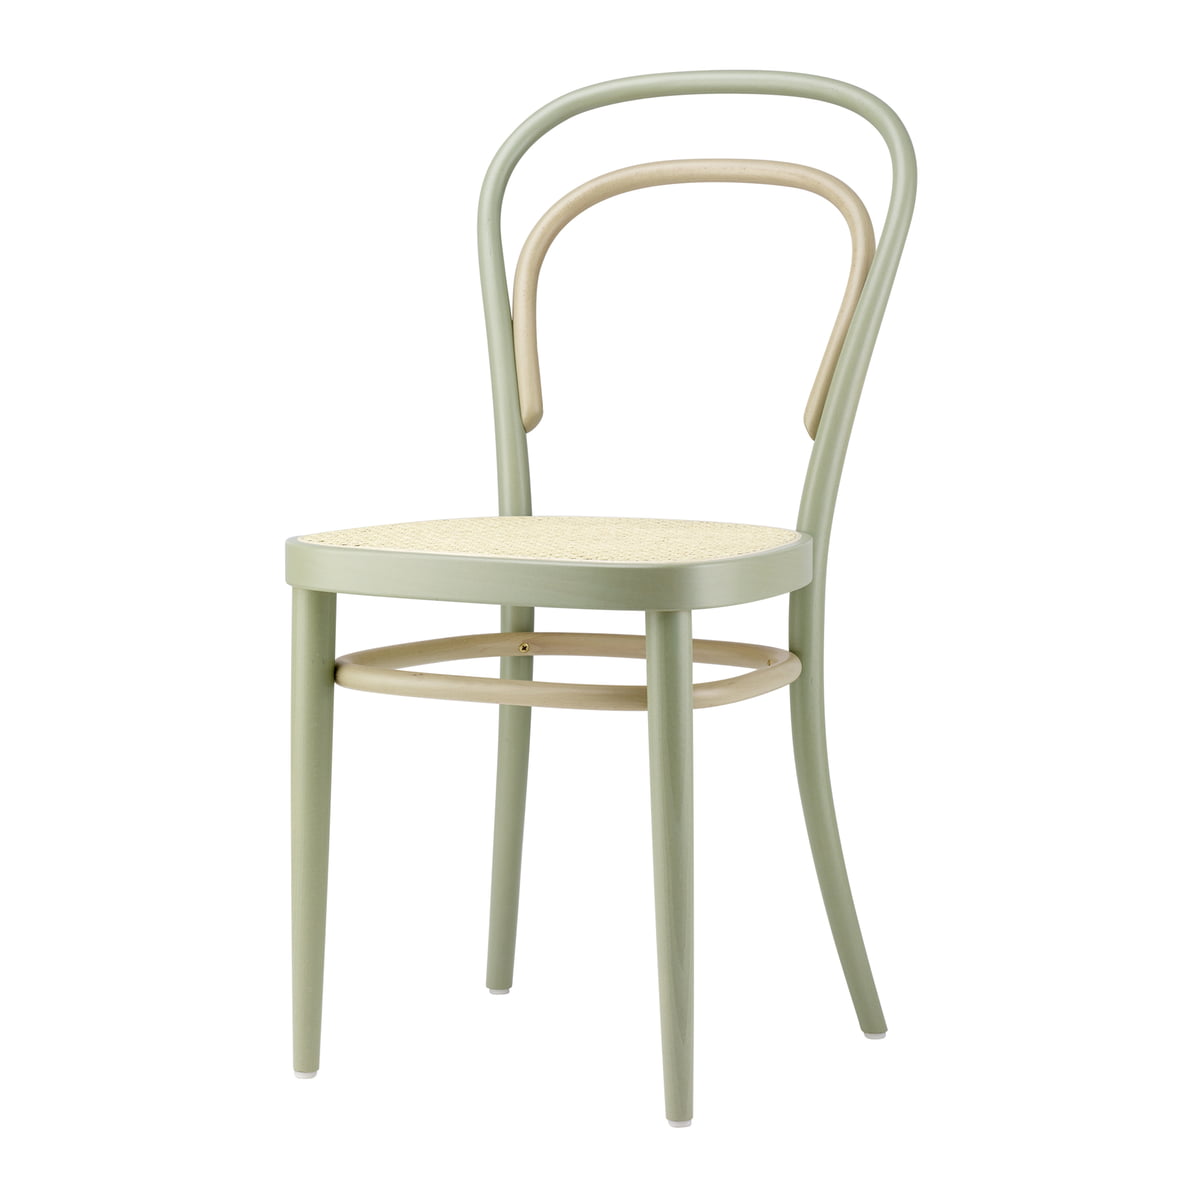 Thonet 214 Two Tone Bentwood Chair Special Edition Connox